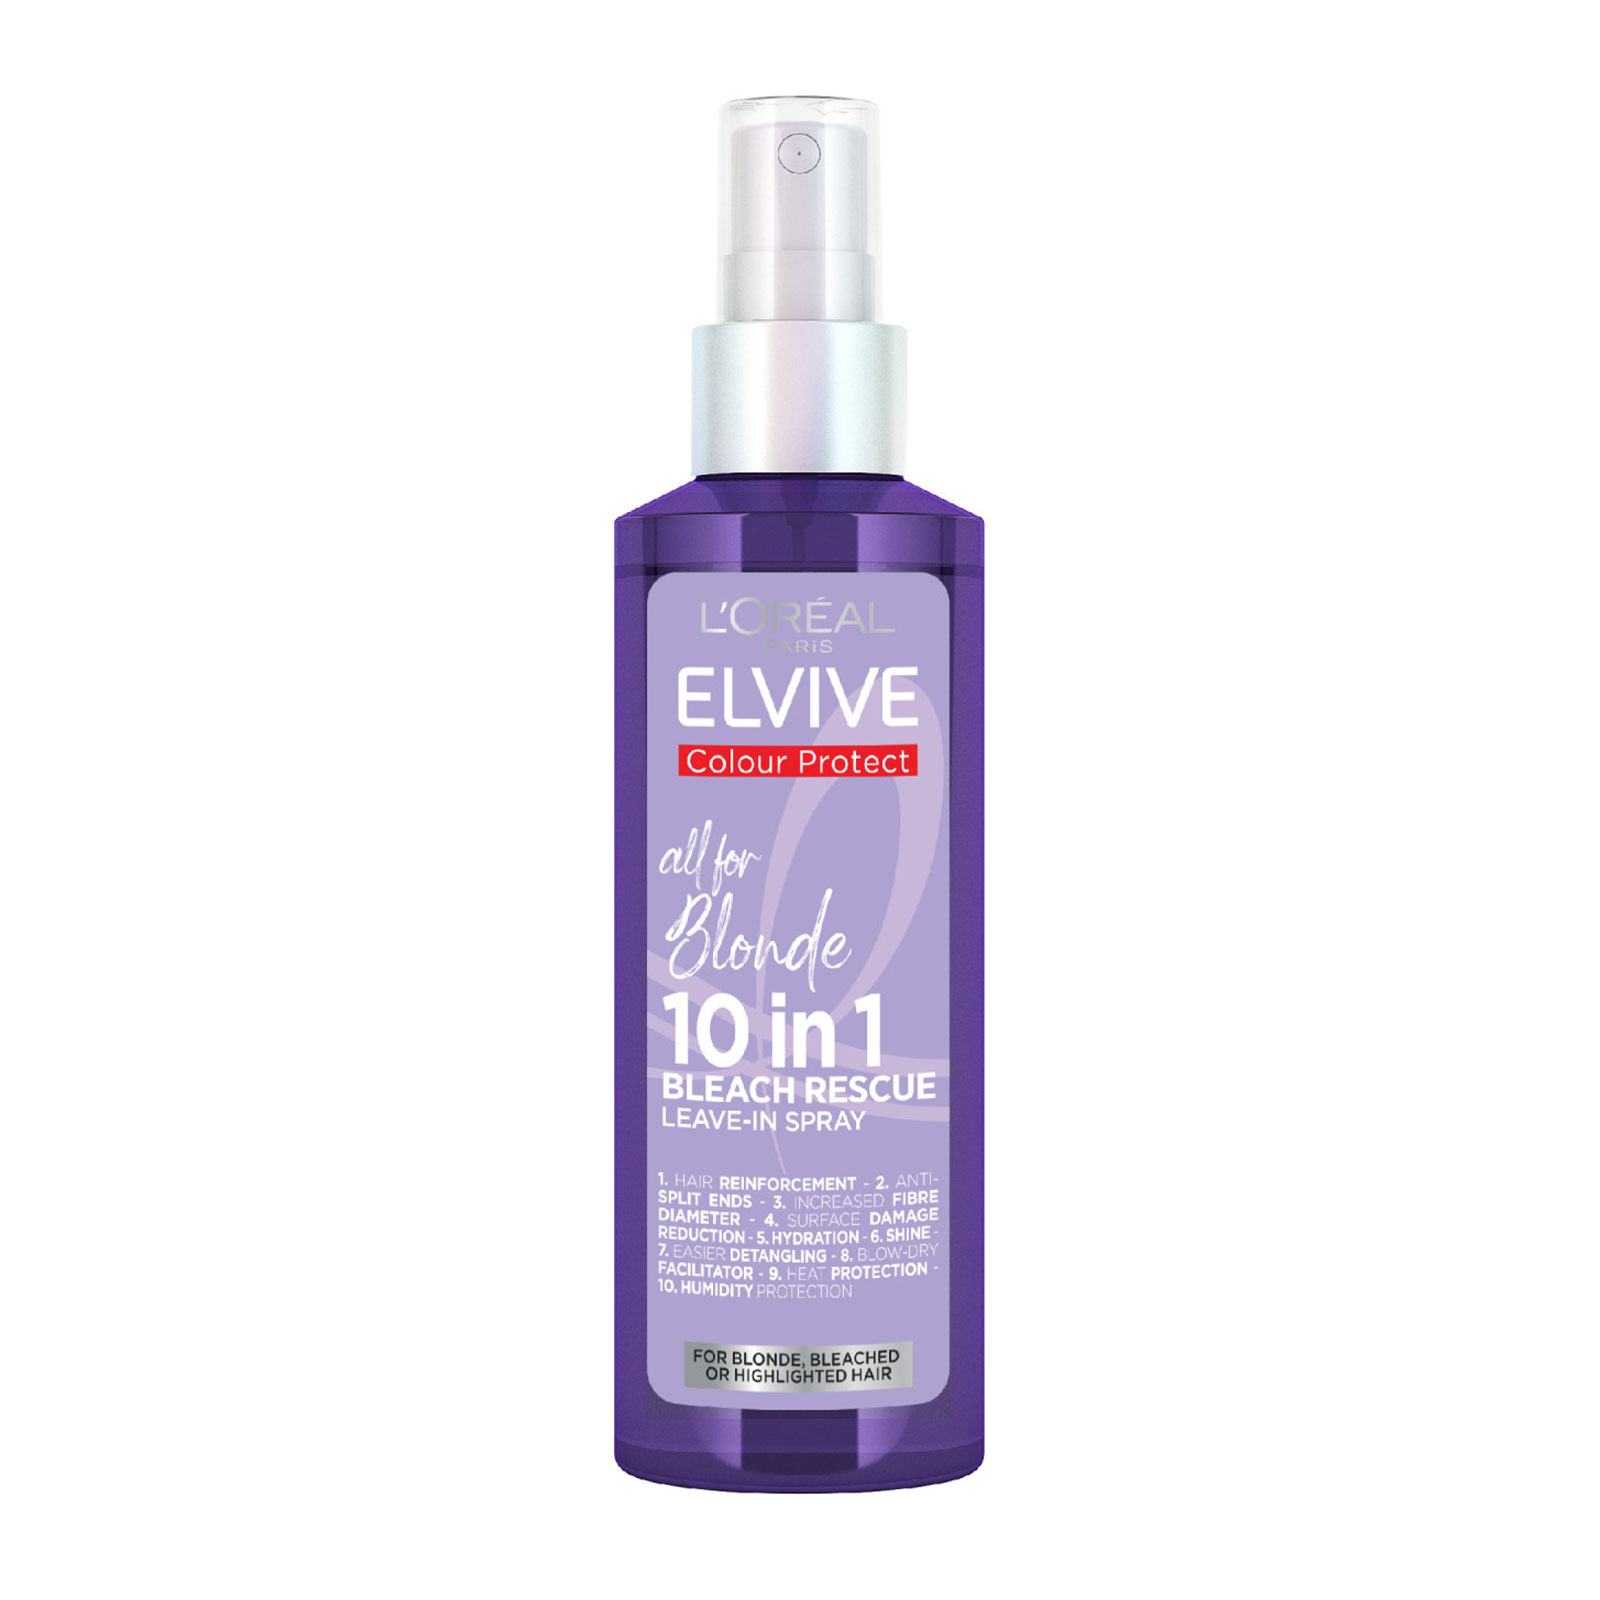 L'Oreal Paris Elvive All for Blonde 10-in-1 Bleach Rescue Leave in Spray 150ml